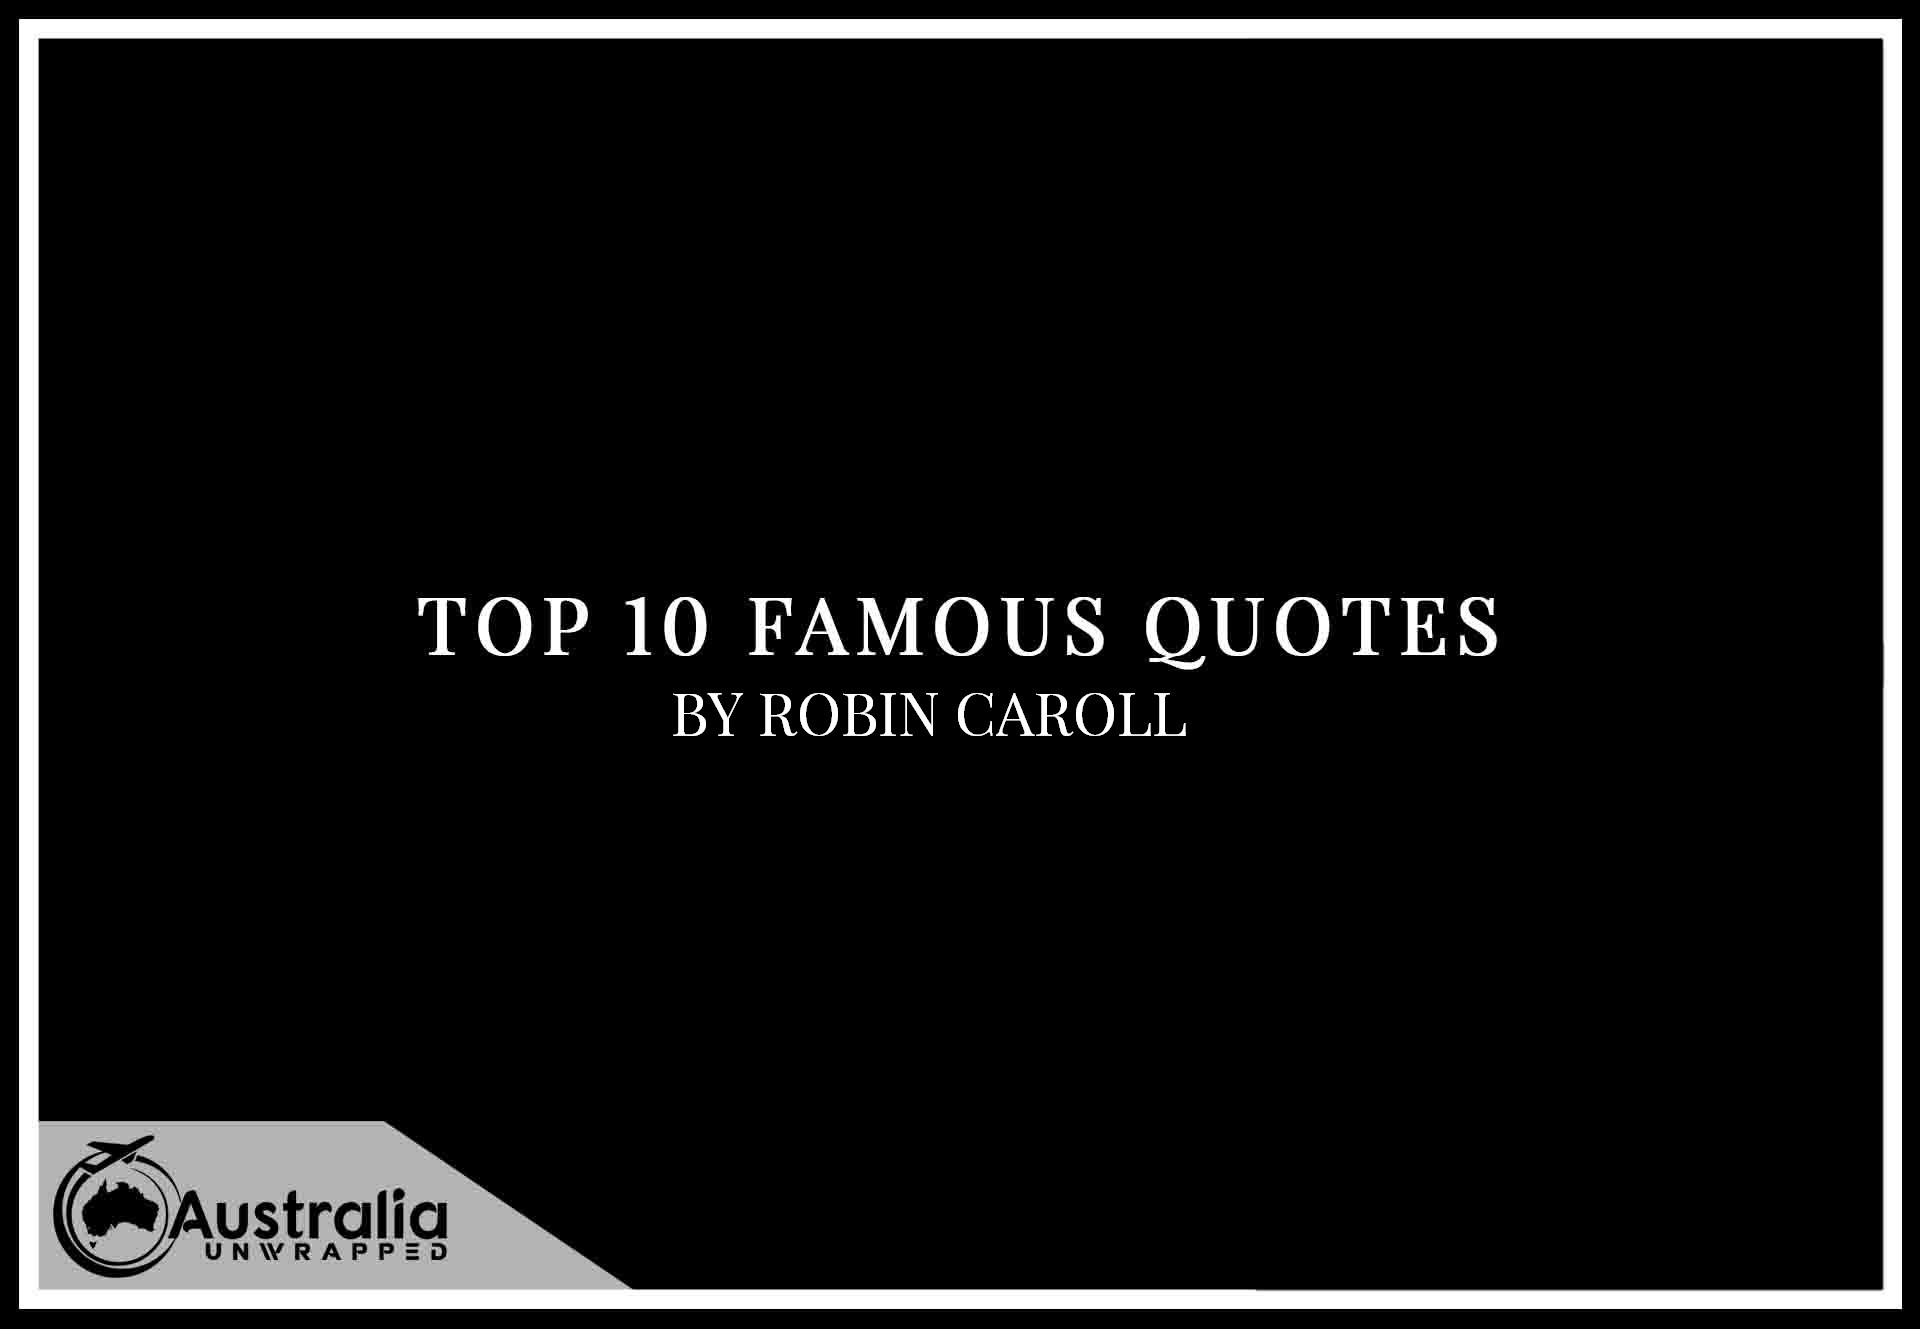 Top 10 Famous Quotes by Author Robin Caroll